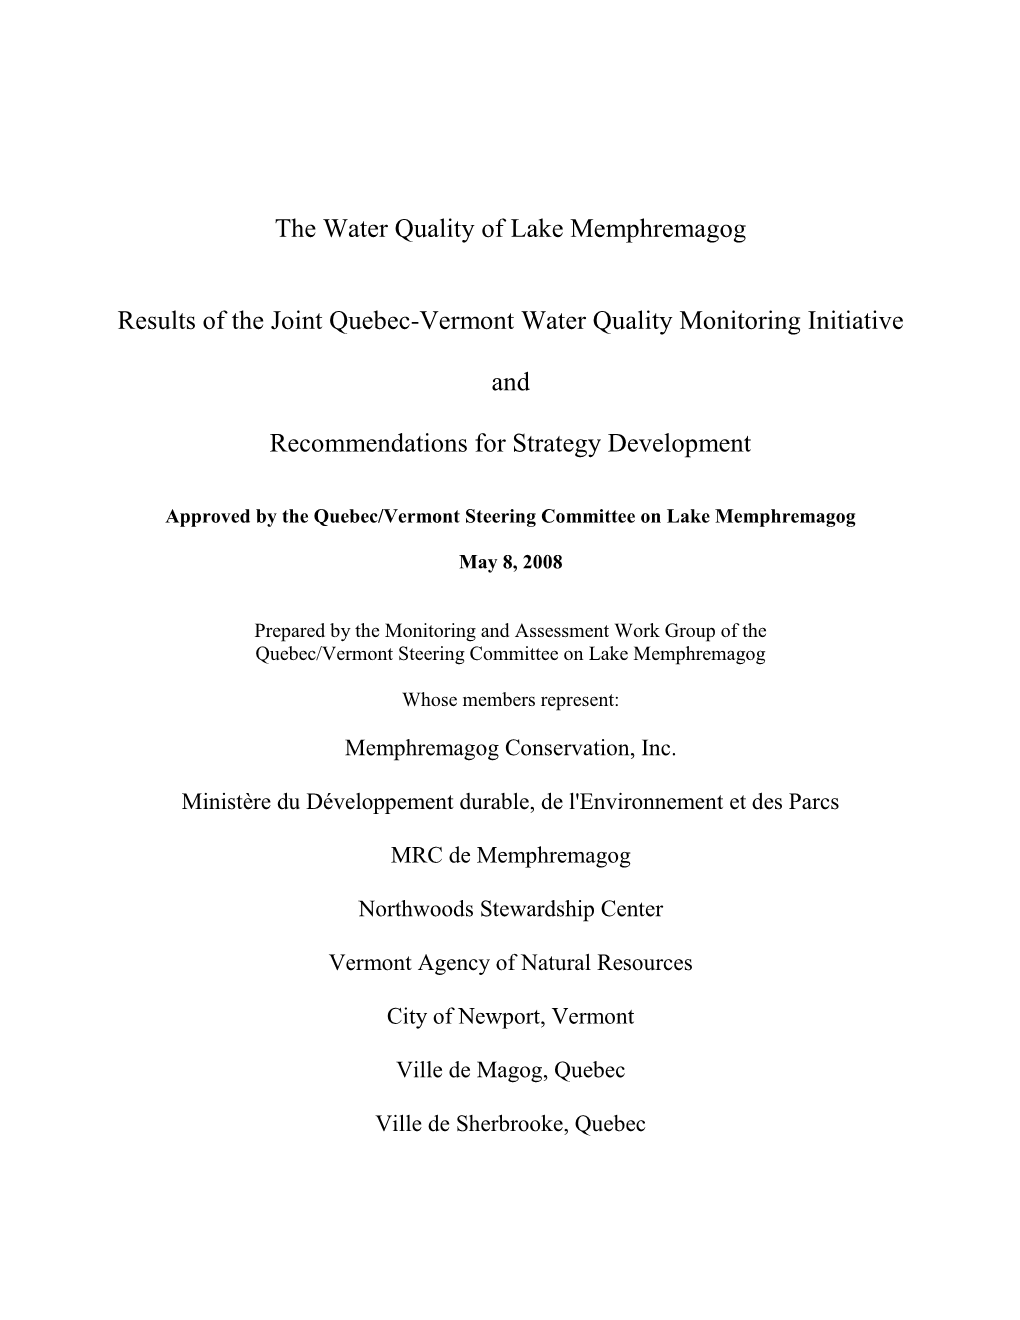 The Water Quality of Lake Memphremagog, 2005-2006